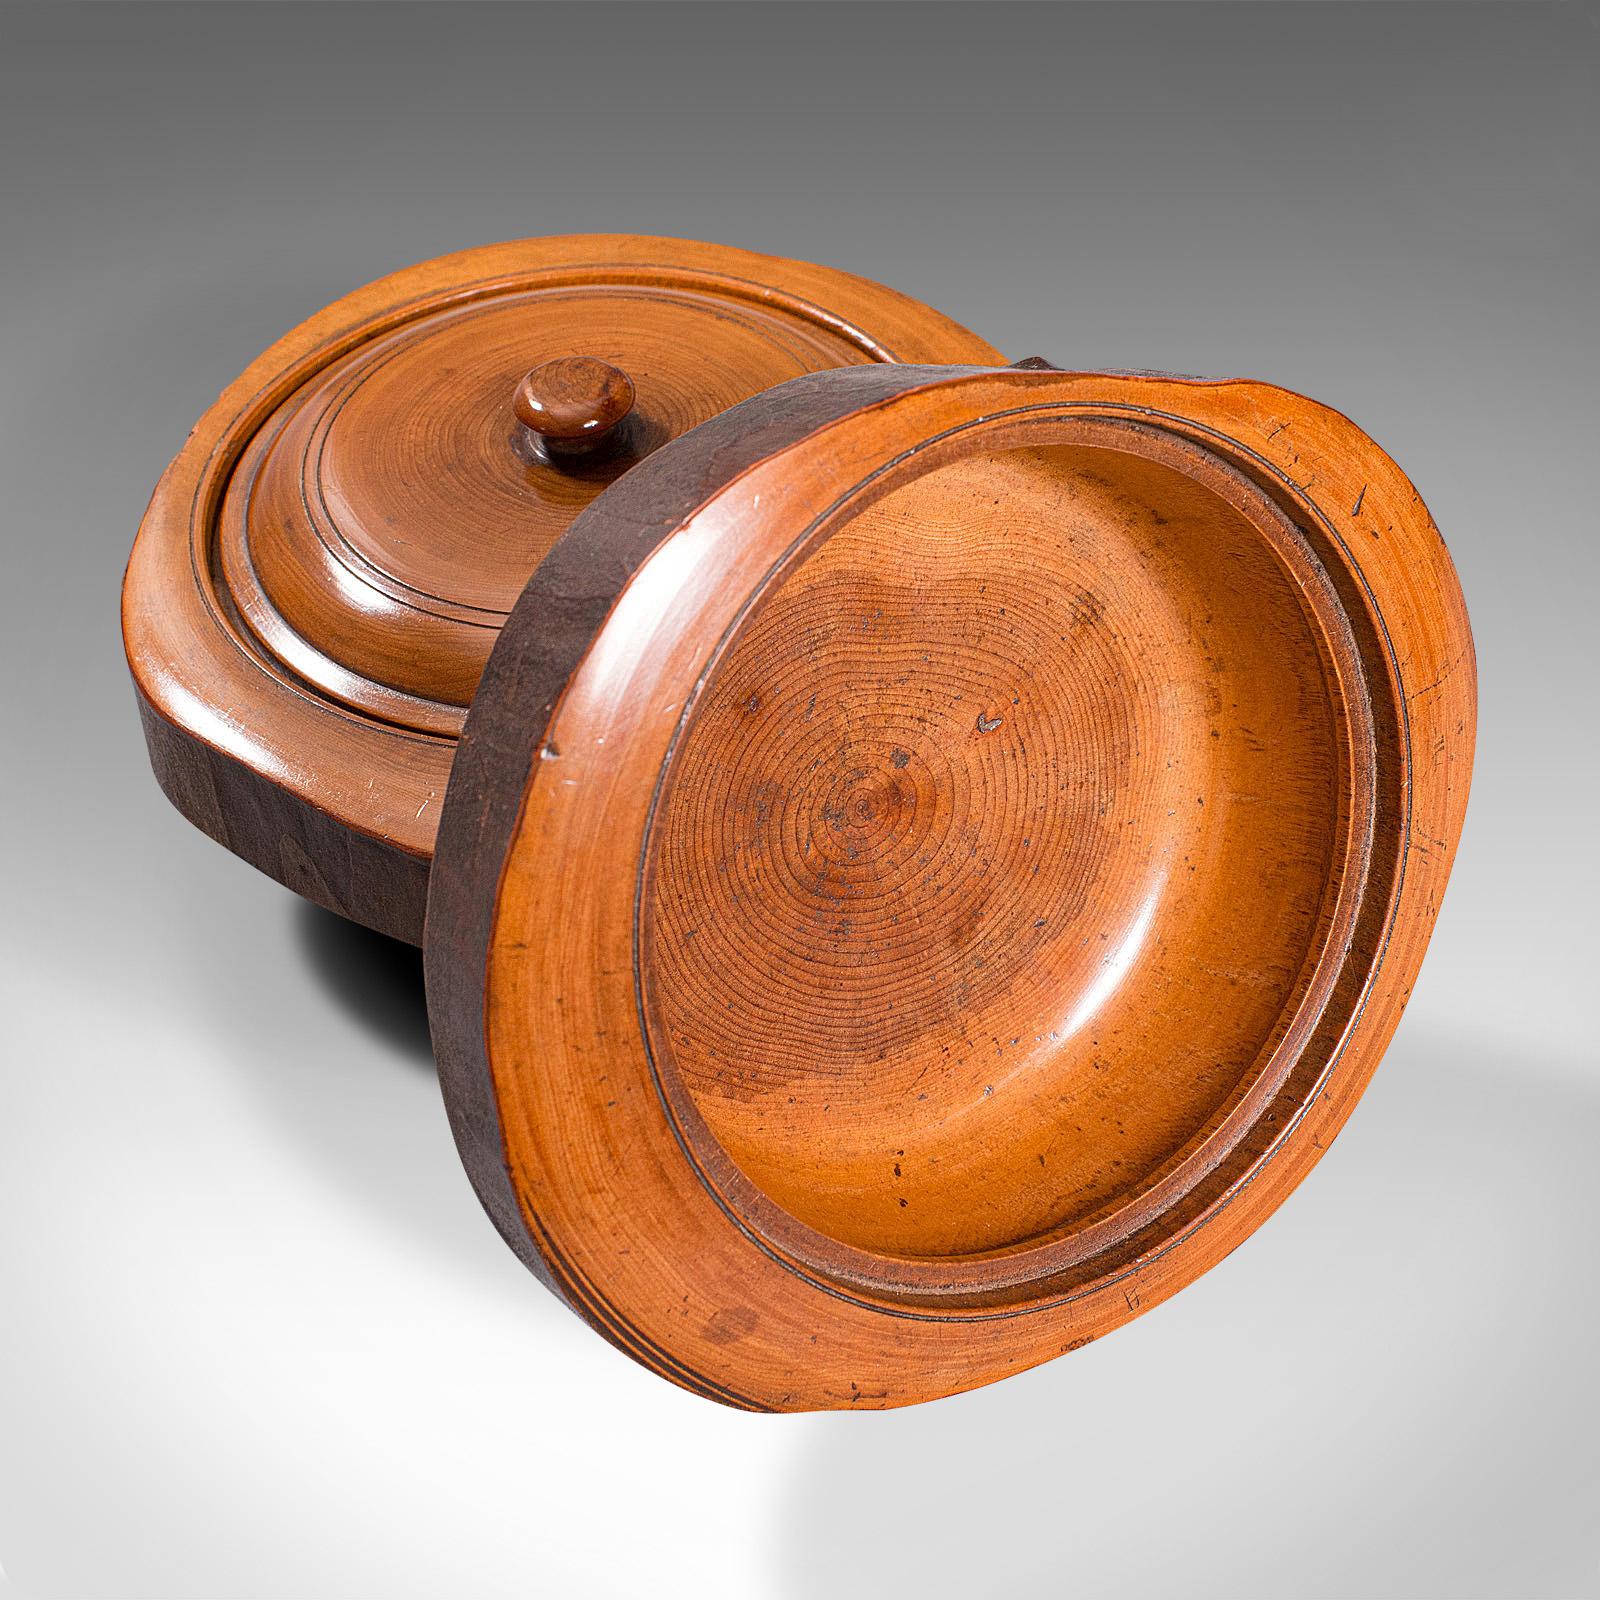 Pair of Antique Carved Lidded Bowls, Treen, English, Yew, Victorian, circa 1900 For Sale 5